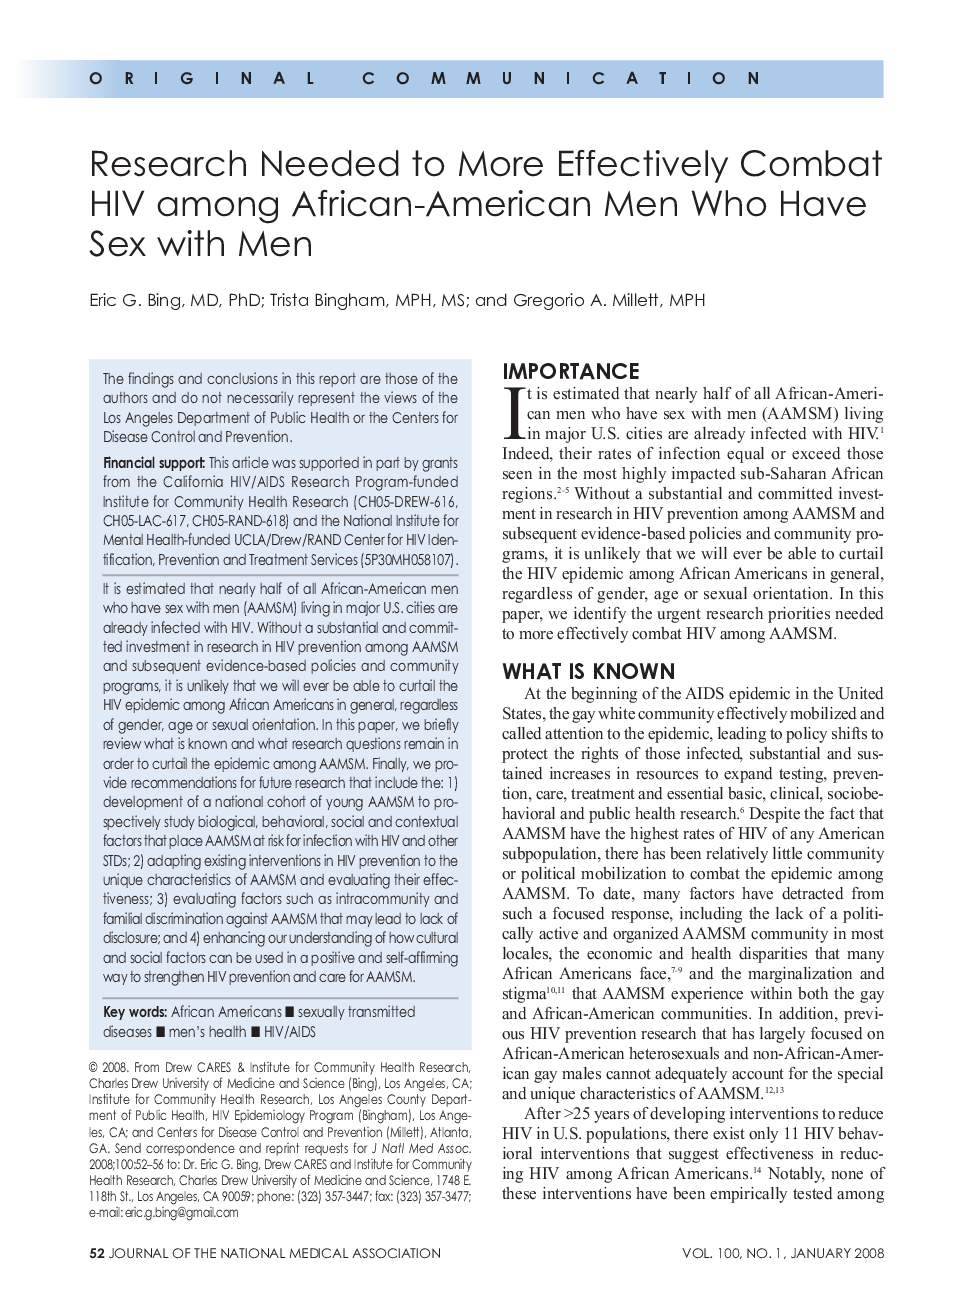 Research Needed to More Effectively Combat HIV among African-American Men Who Have Sex with Men